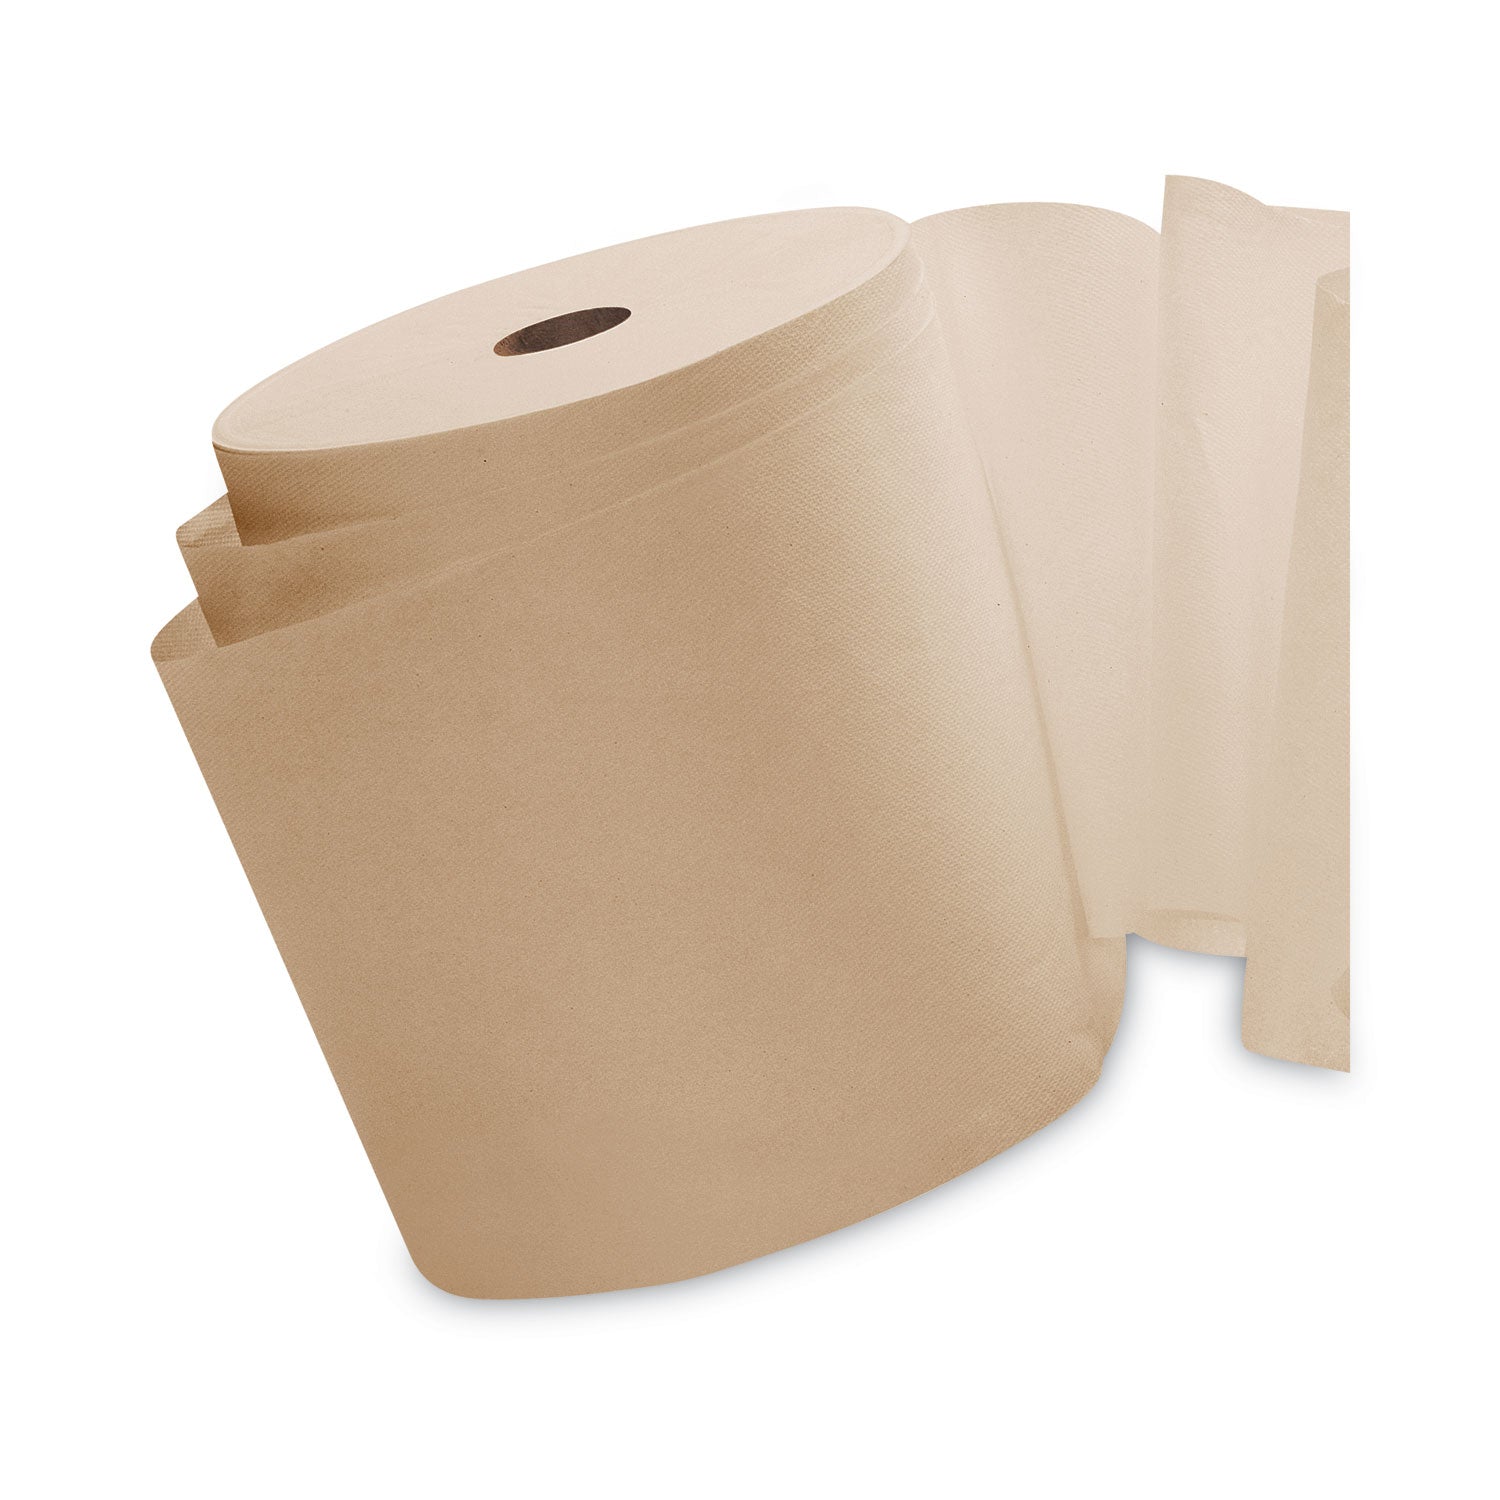 Essential Hard Roll Towels for Business, 1-Ply, 8" x 800 ft, 1.5" Core, Natural, 12 Rolls/Carton - 5